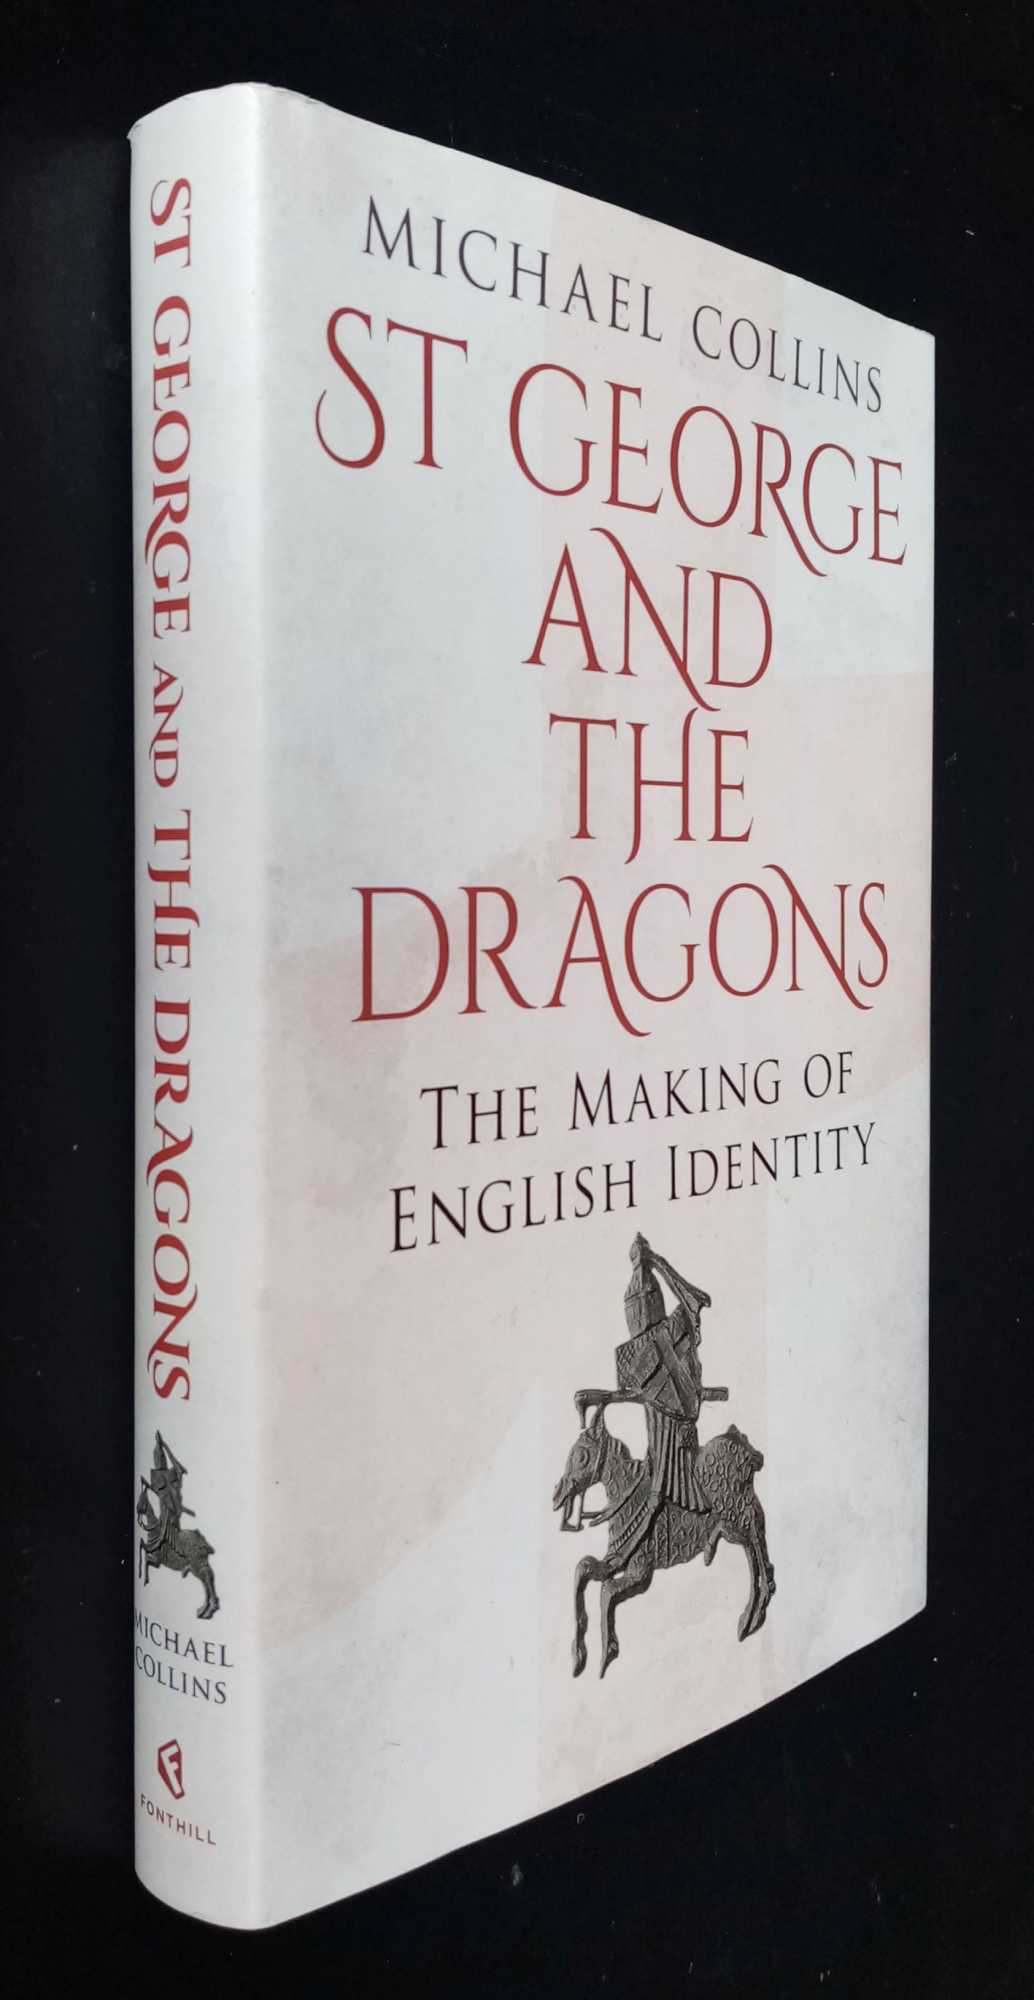 Michael Collins - St George and the Dragons: The Making of English Identity   SIGNED/Inscribed